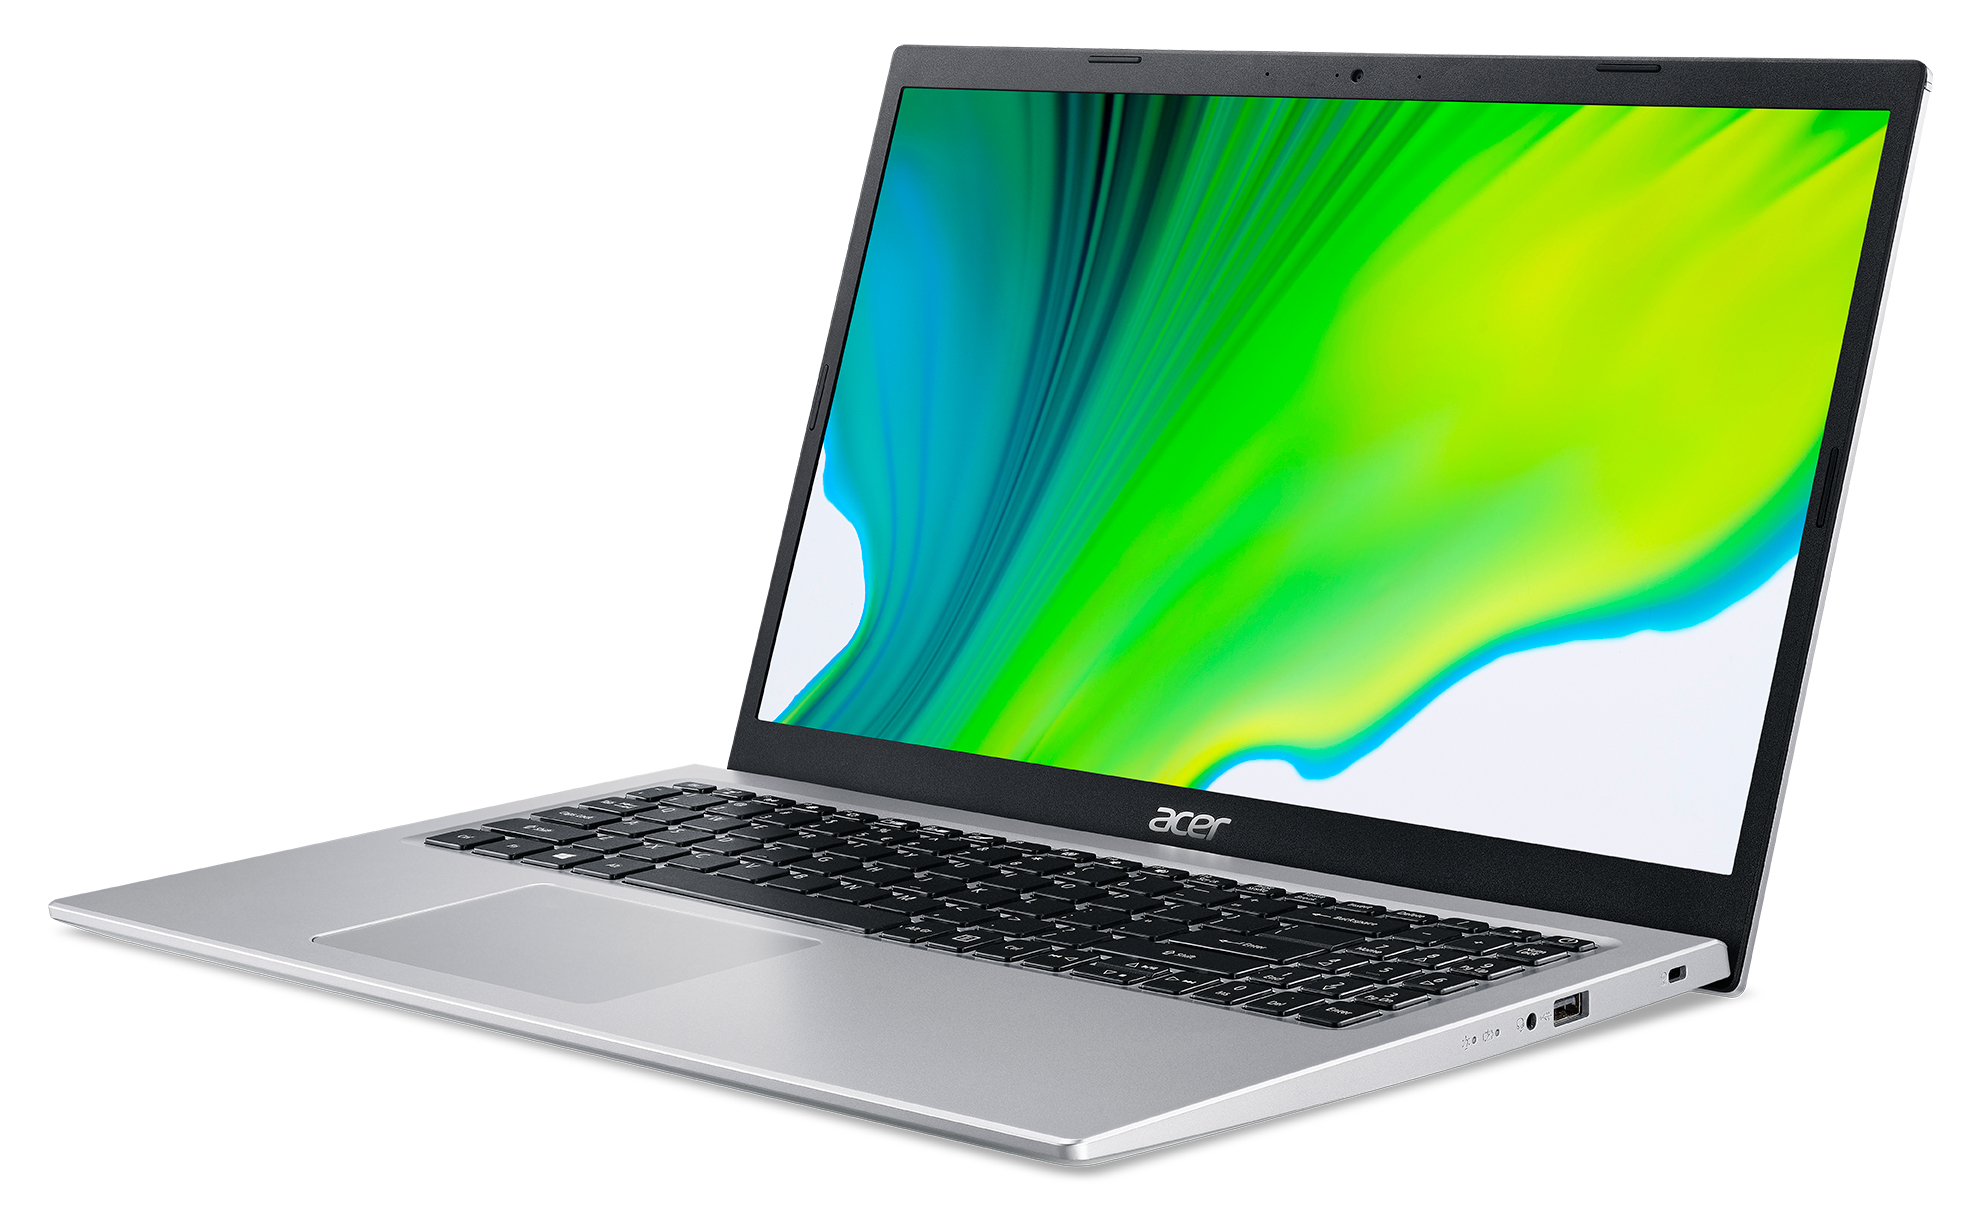 ACER GB 512 8 i5 Intel® Display, SSD, Prozessor, (A515-56-560W), Core™ mit Intel Aspire 5 Notebook 15,6 Zoll Acer GB Xe Silber Iris RAM, Graphics,